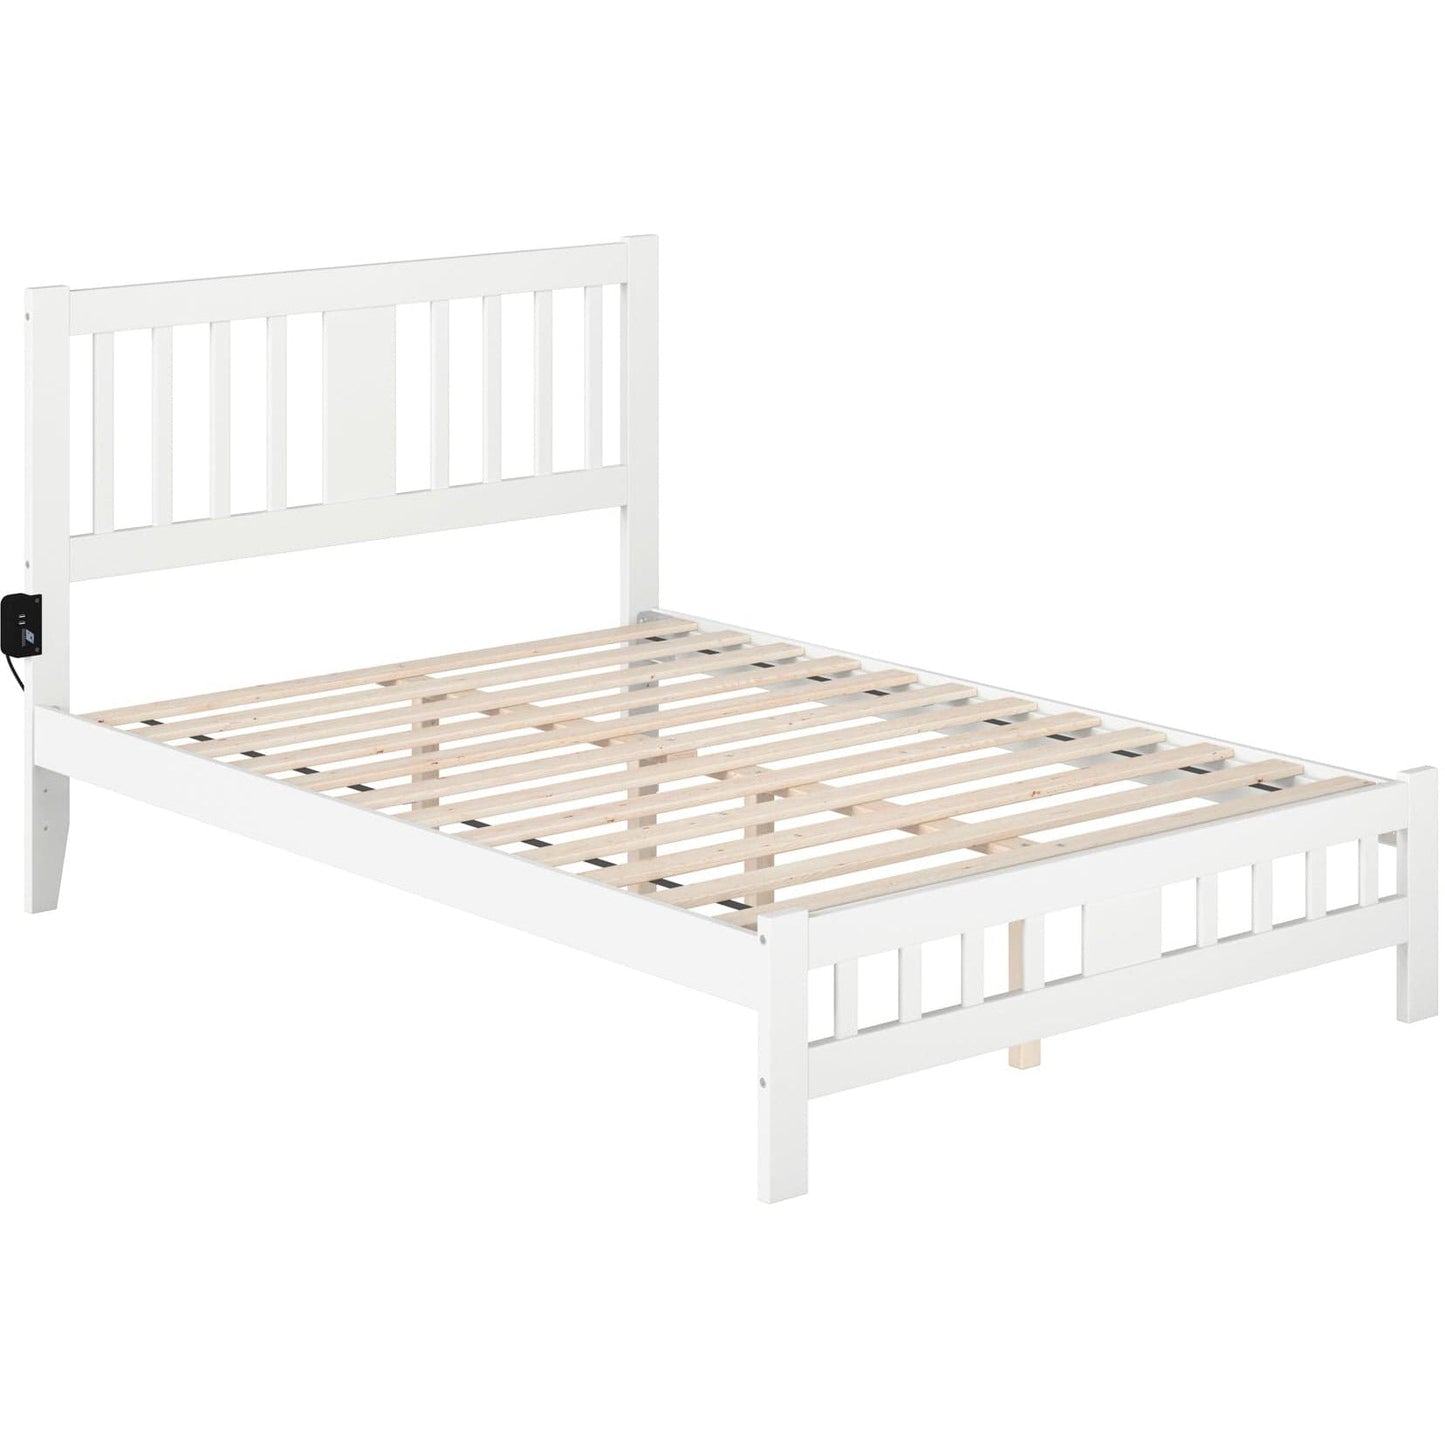 AFI Furnishings Tahoe Full Bed with Footboard in White AG8960032